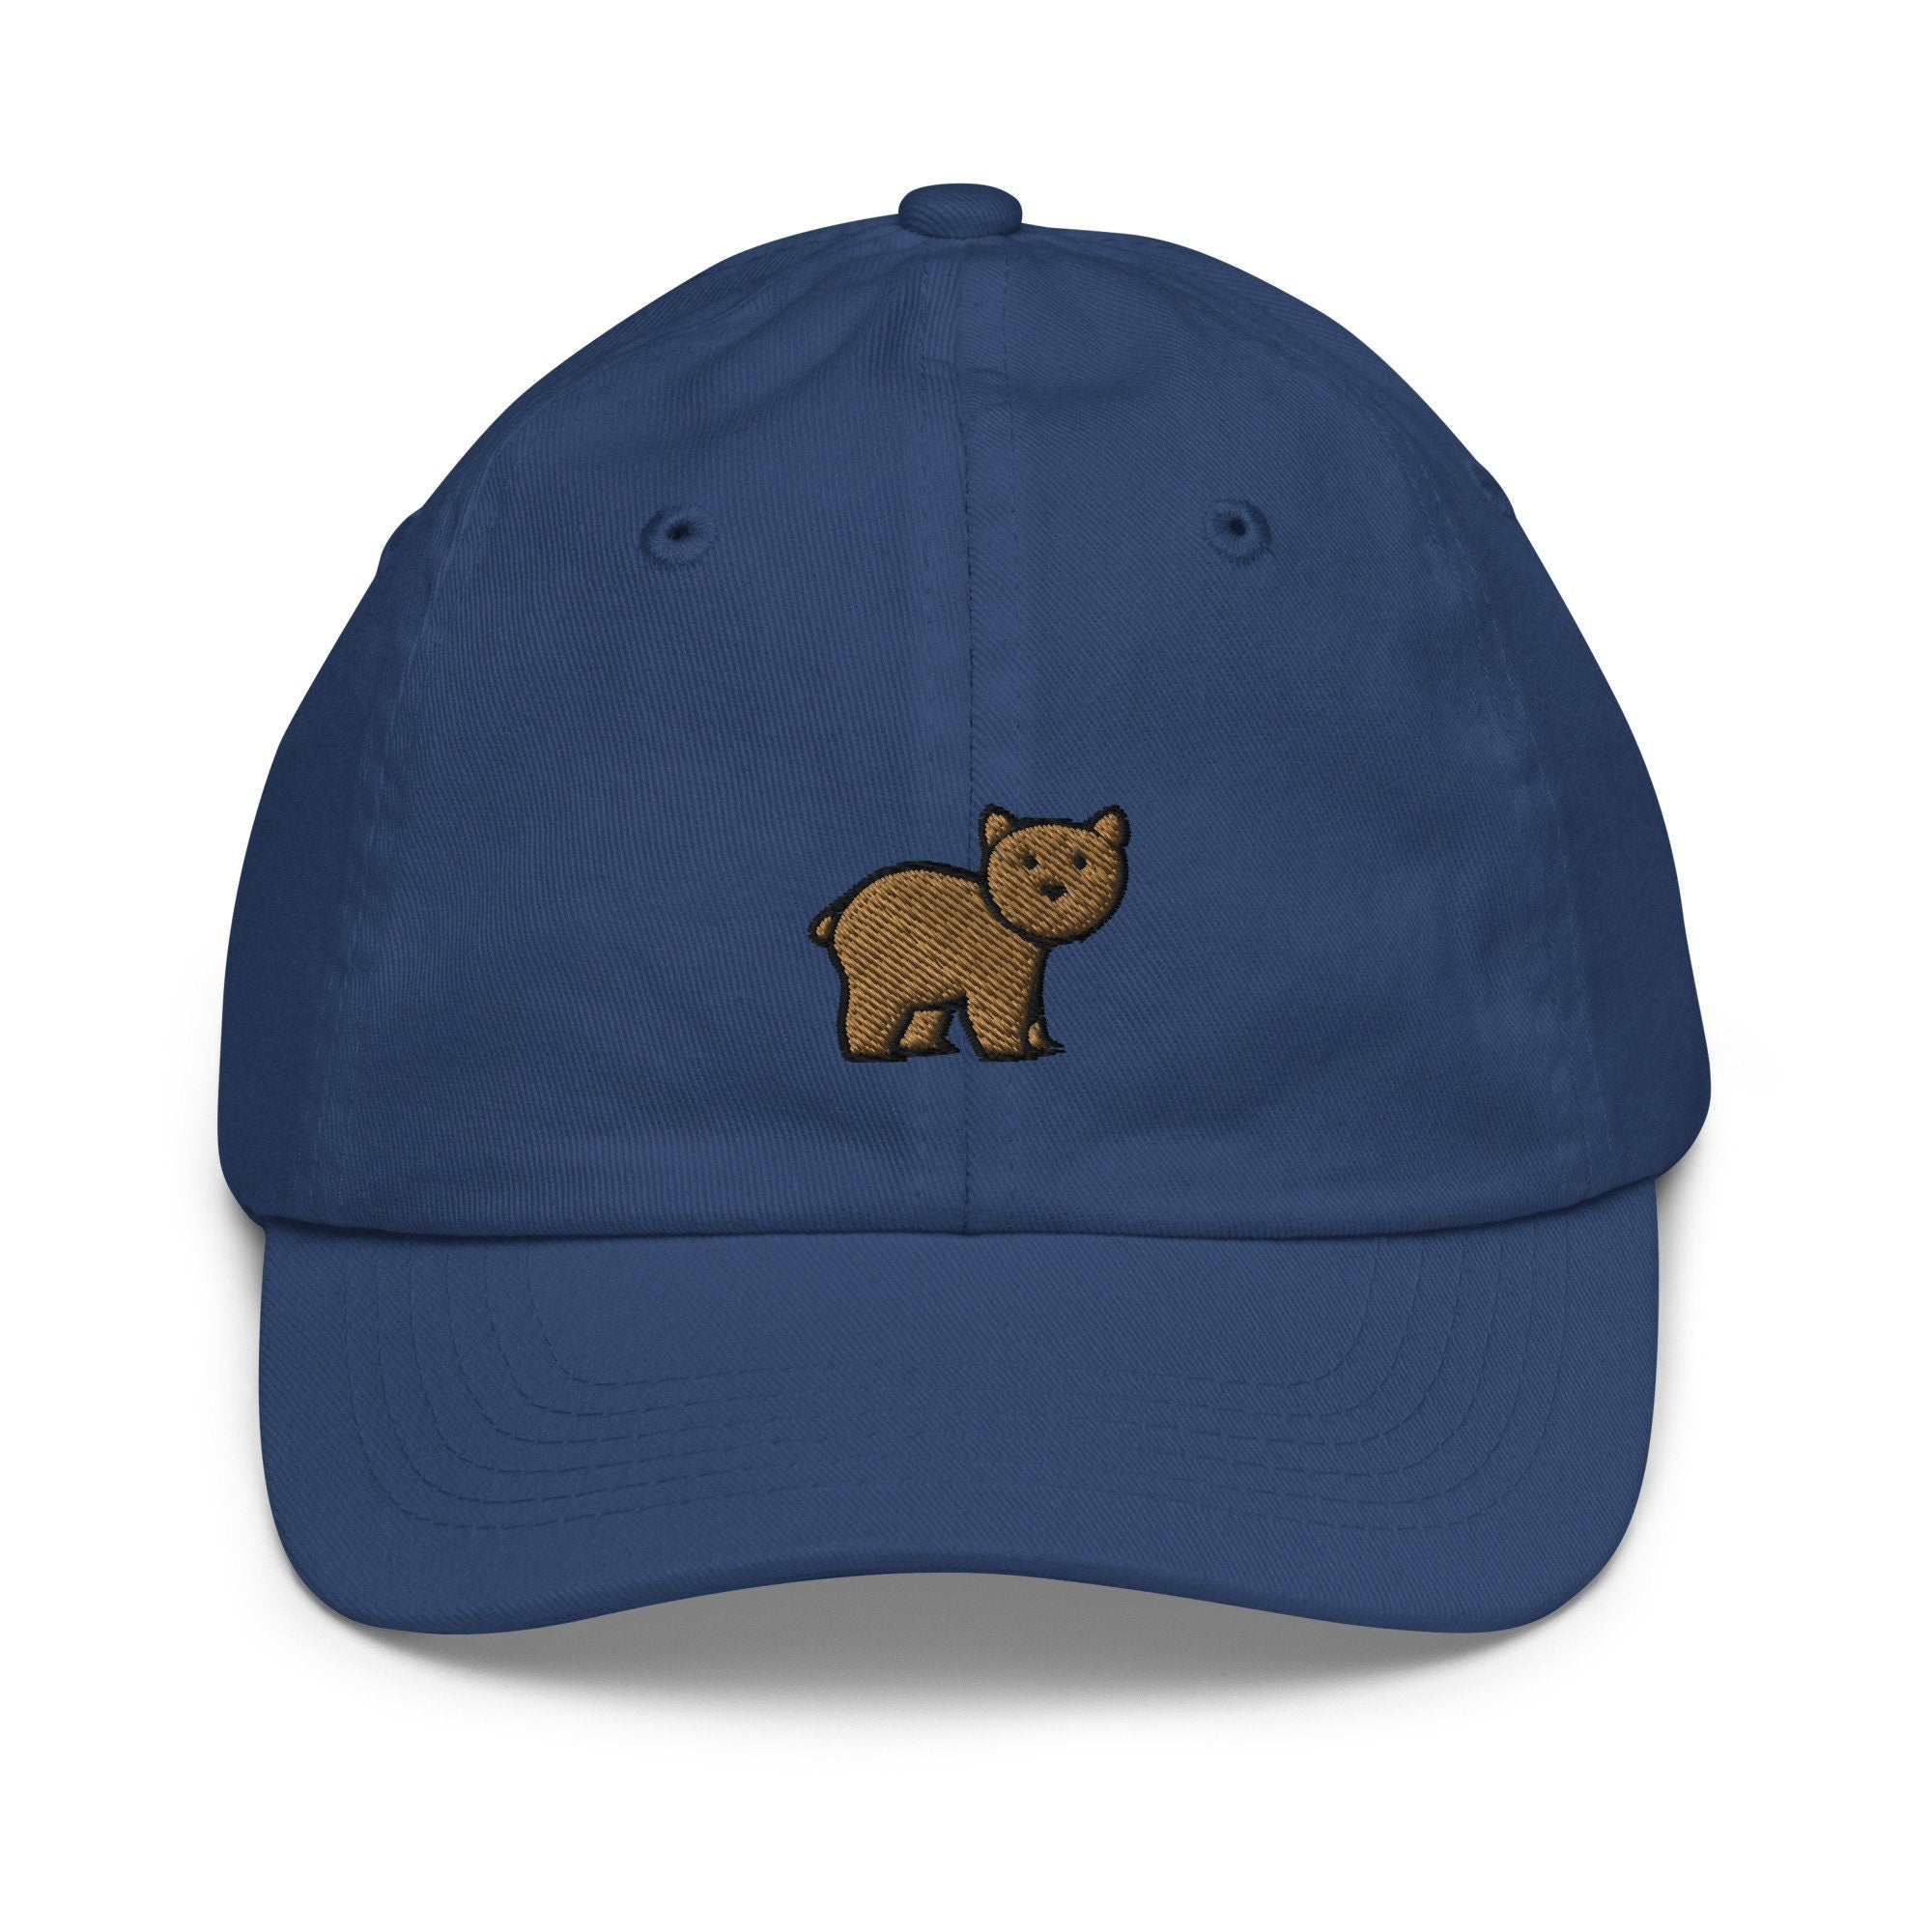 Bear Youth Baseball Cap, Handmade Kids Hat, Embroidered Childrens Hat Gift - Multiple Colors